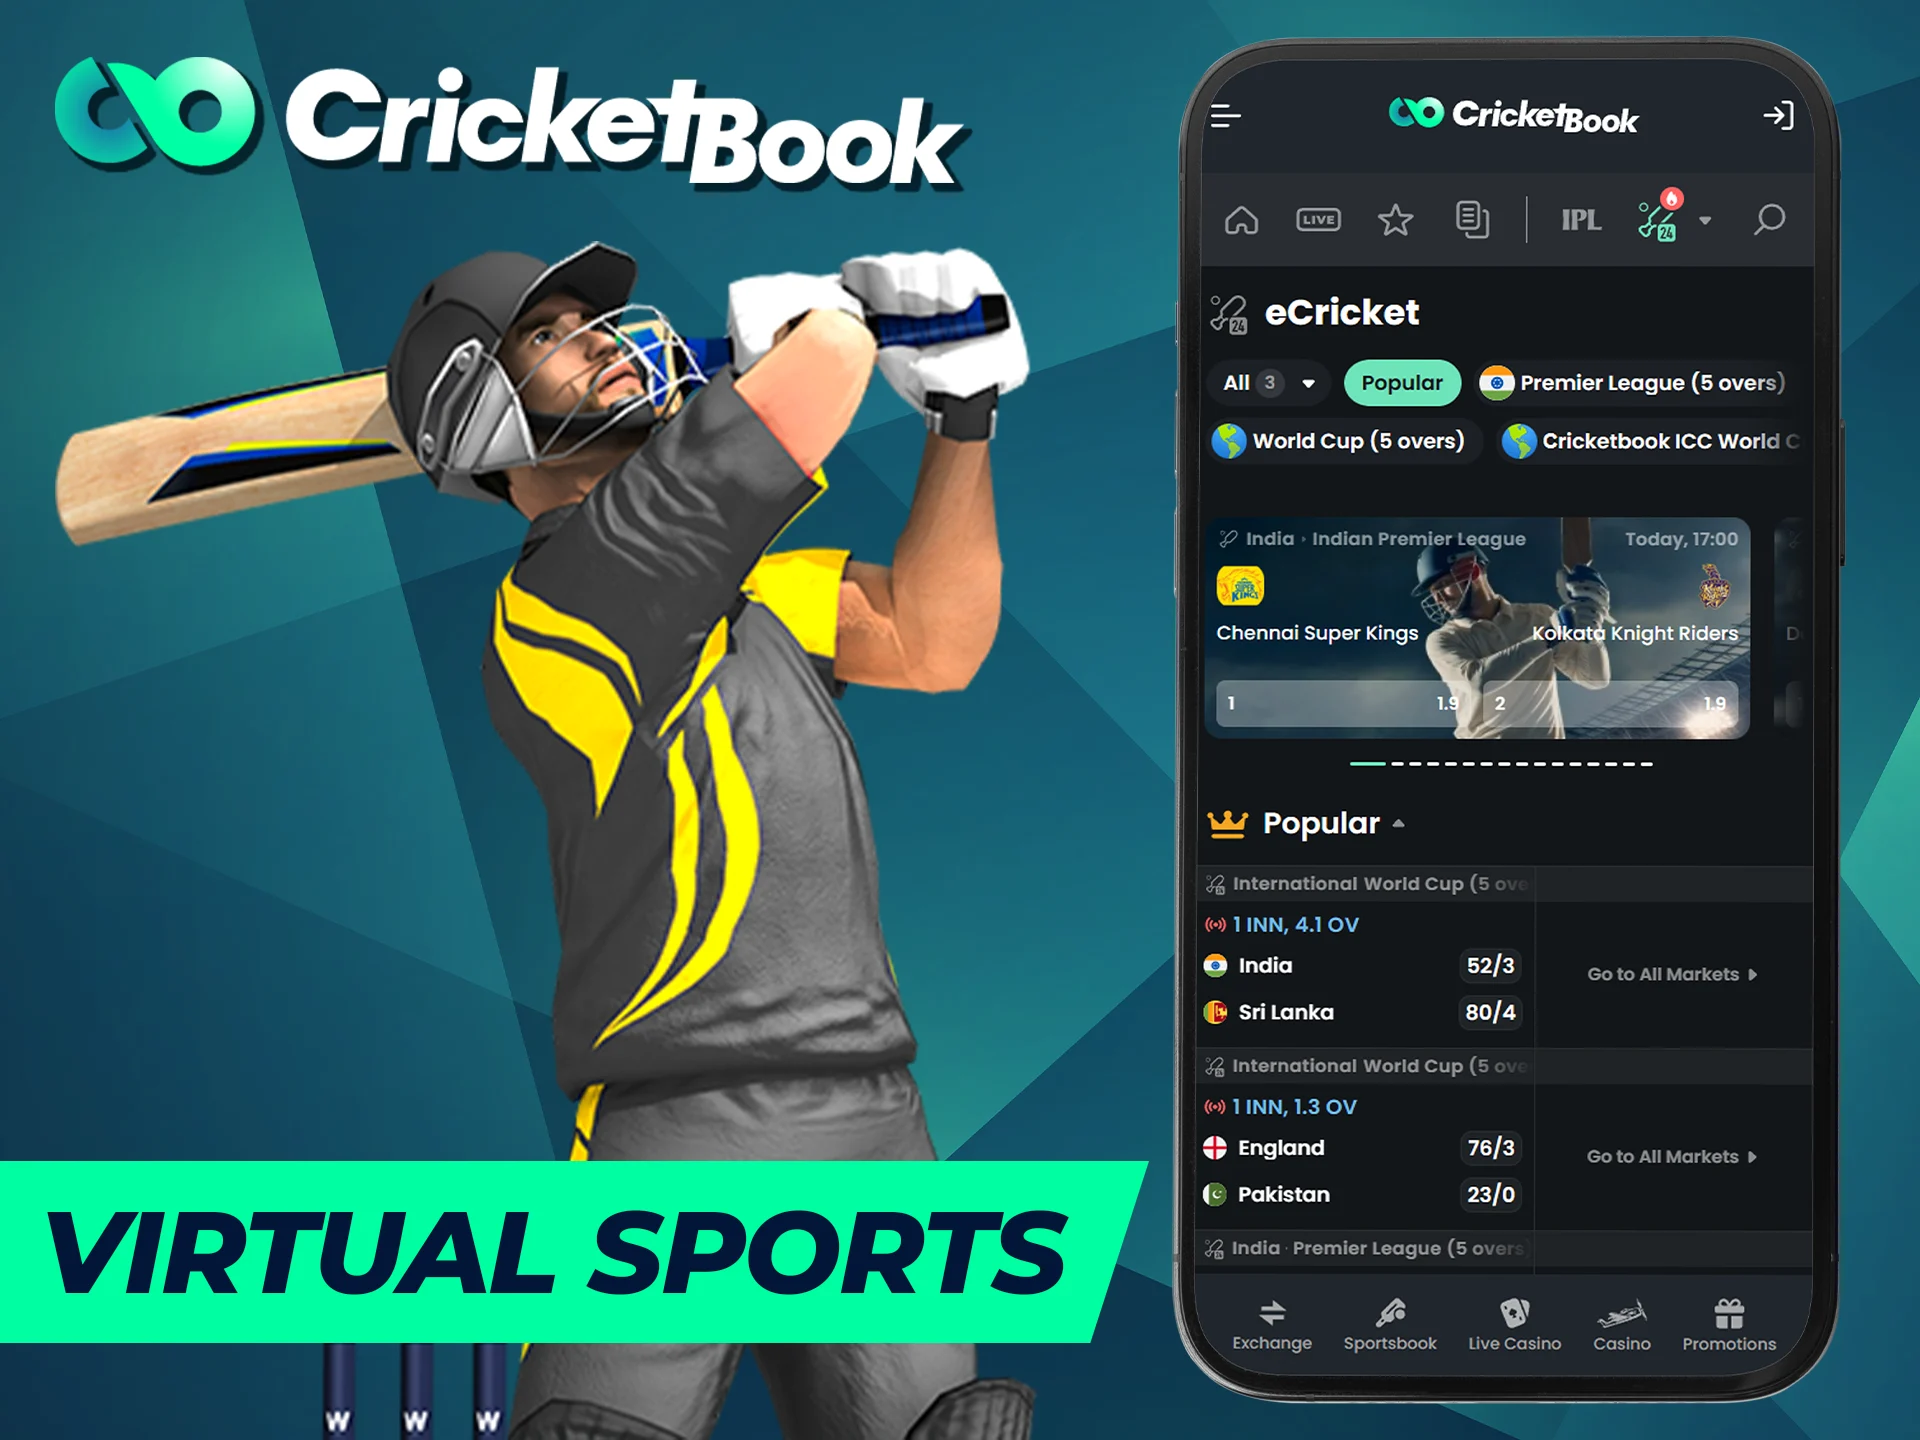 Virtual sports betting is popular on the CricketBook app.